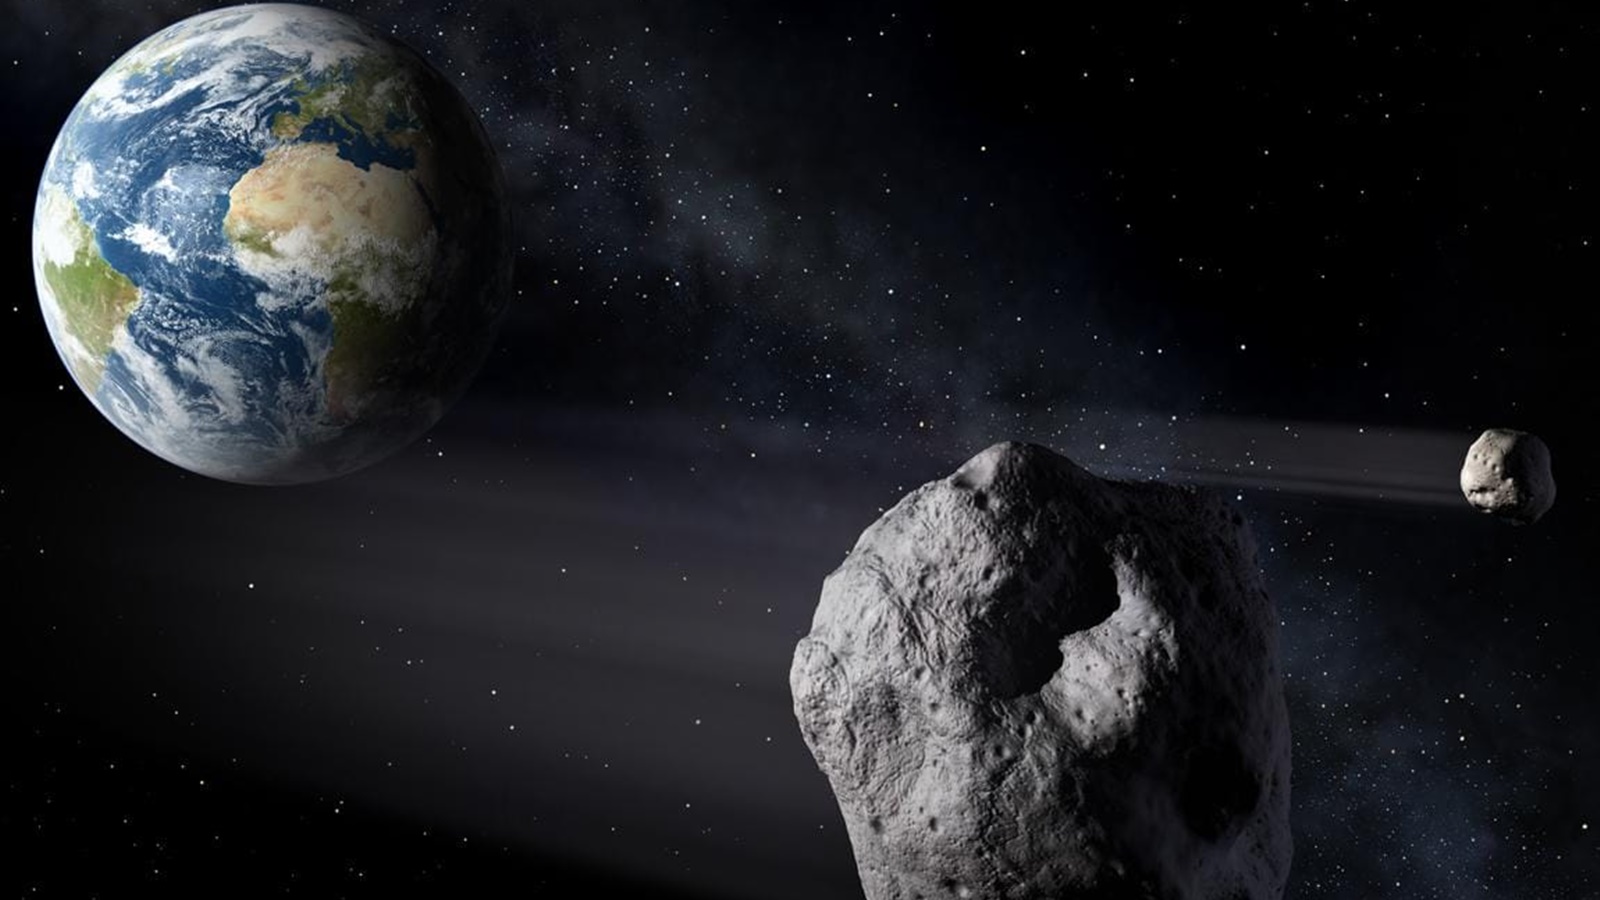 380-foot asteroid to speed past Earth today: NASA - The Indian Express